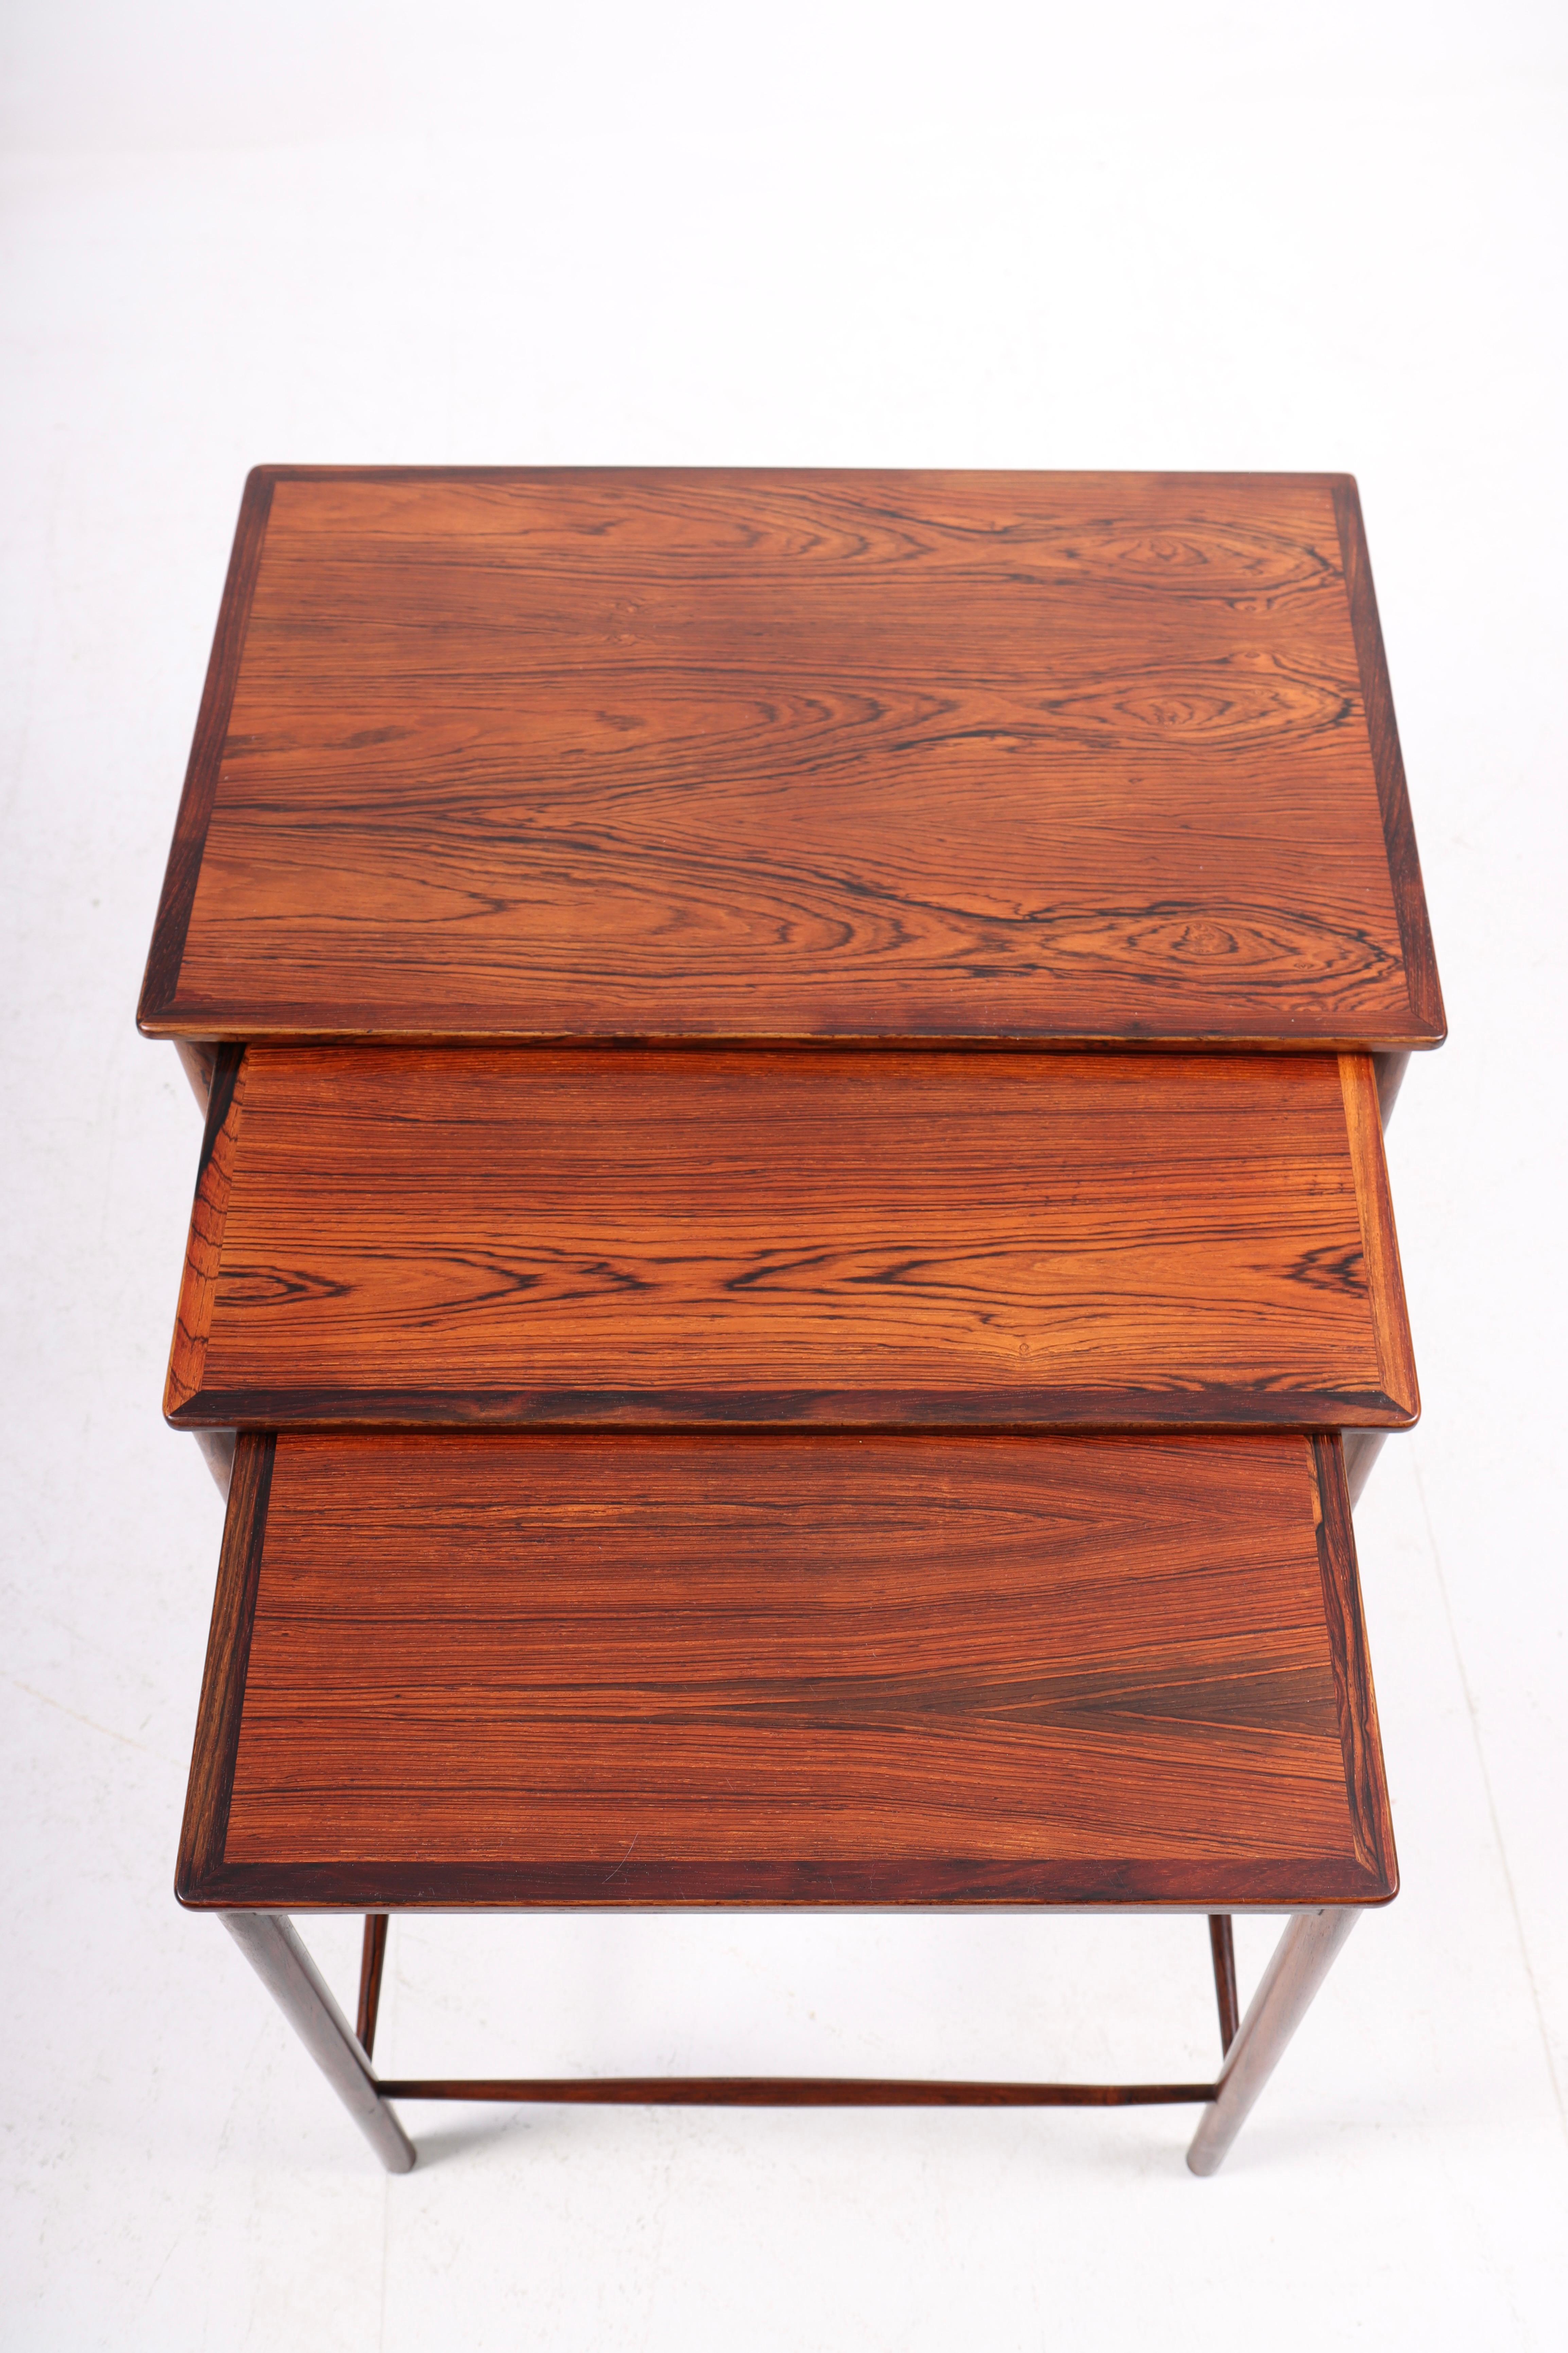 Danish Midcentury Nesting Table in Rosewood Designed by Grethe Jalk, 1950s For Sale